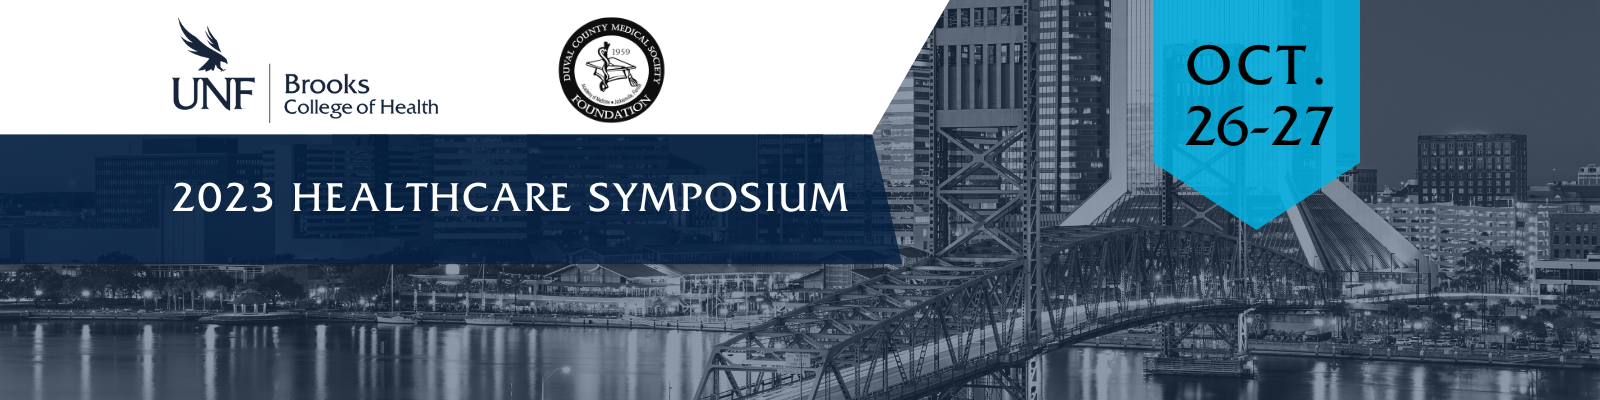 2023 healthcare symposium oct 26 and 27 click for more details